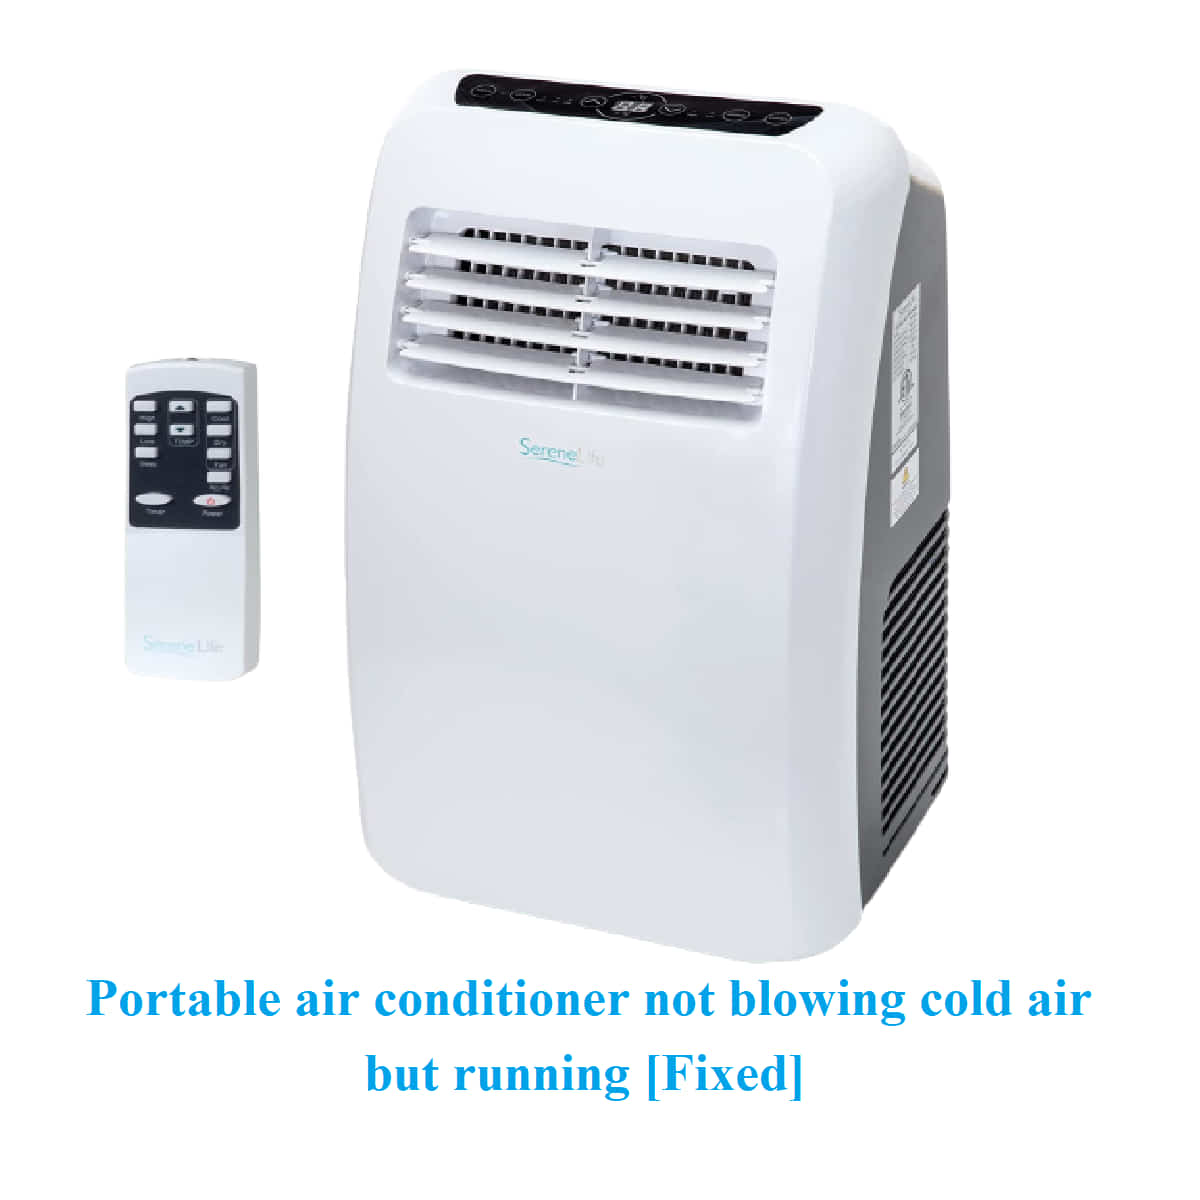 Portable air conditioner not blowing cold air but running